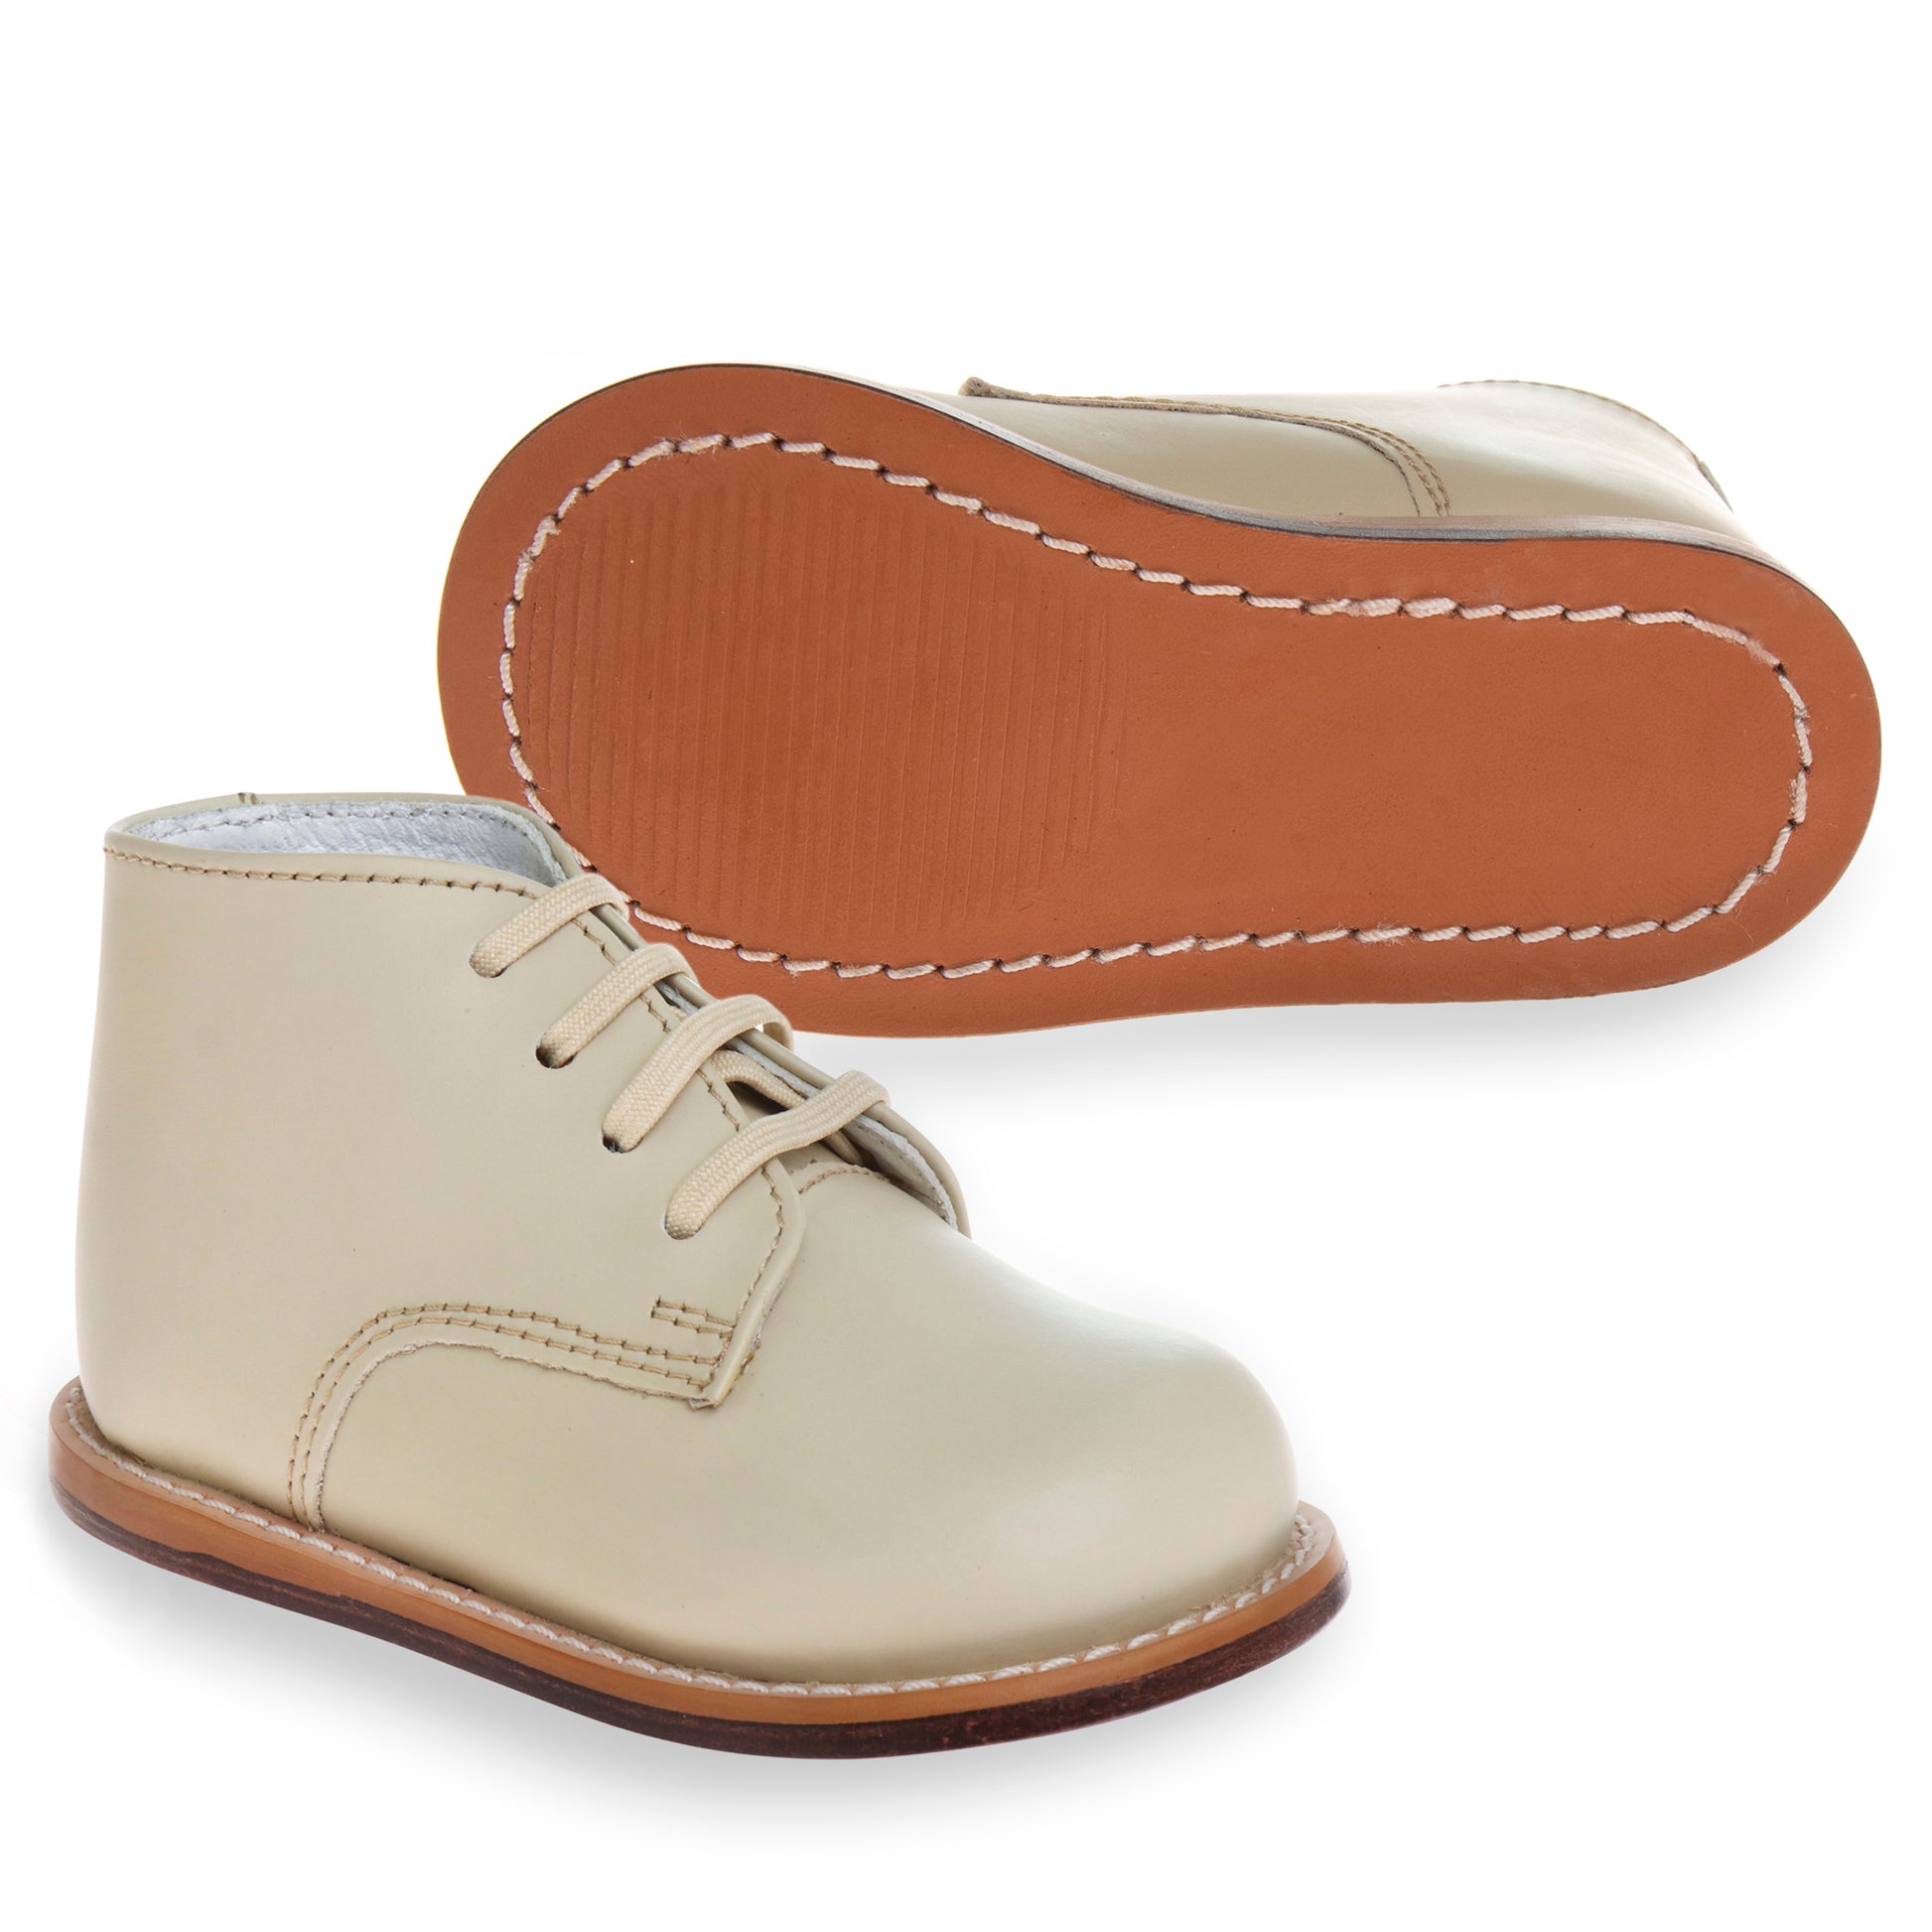 Wanderer Soft Sole Shoes – Gertrude and the King